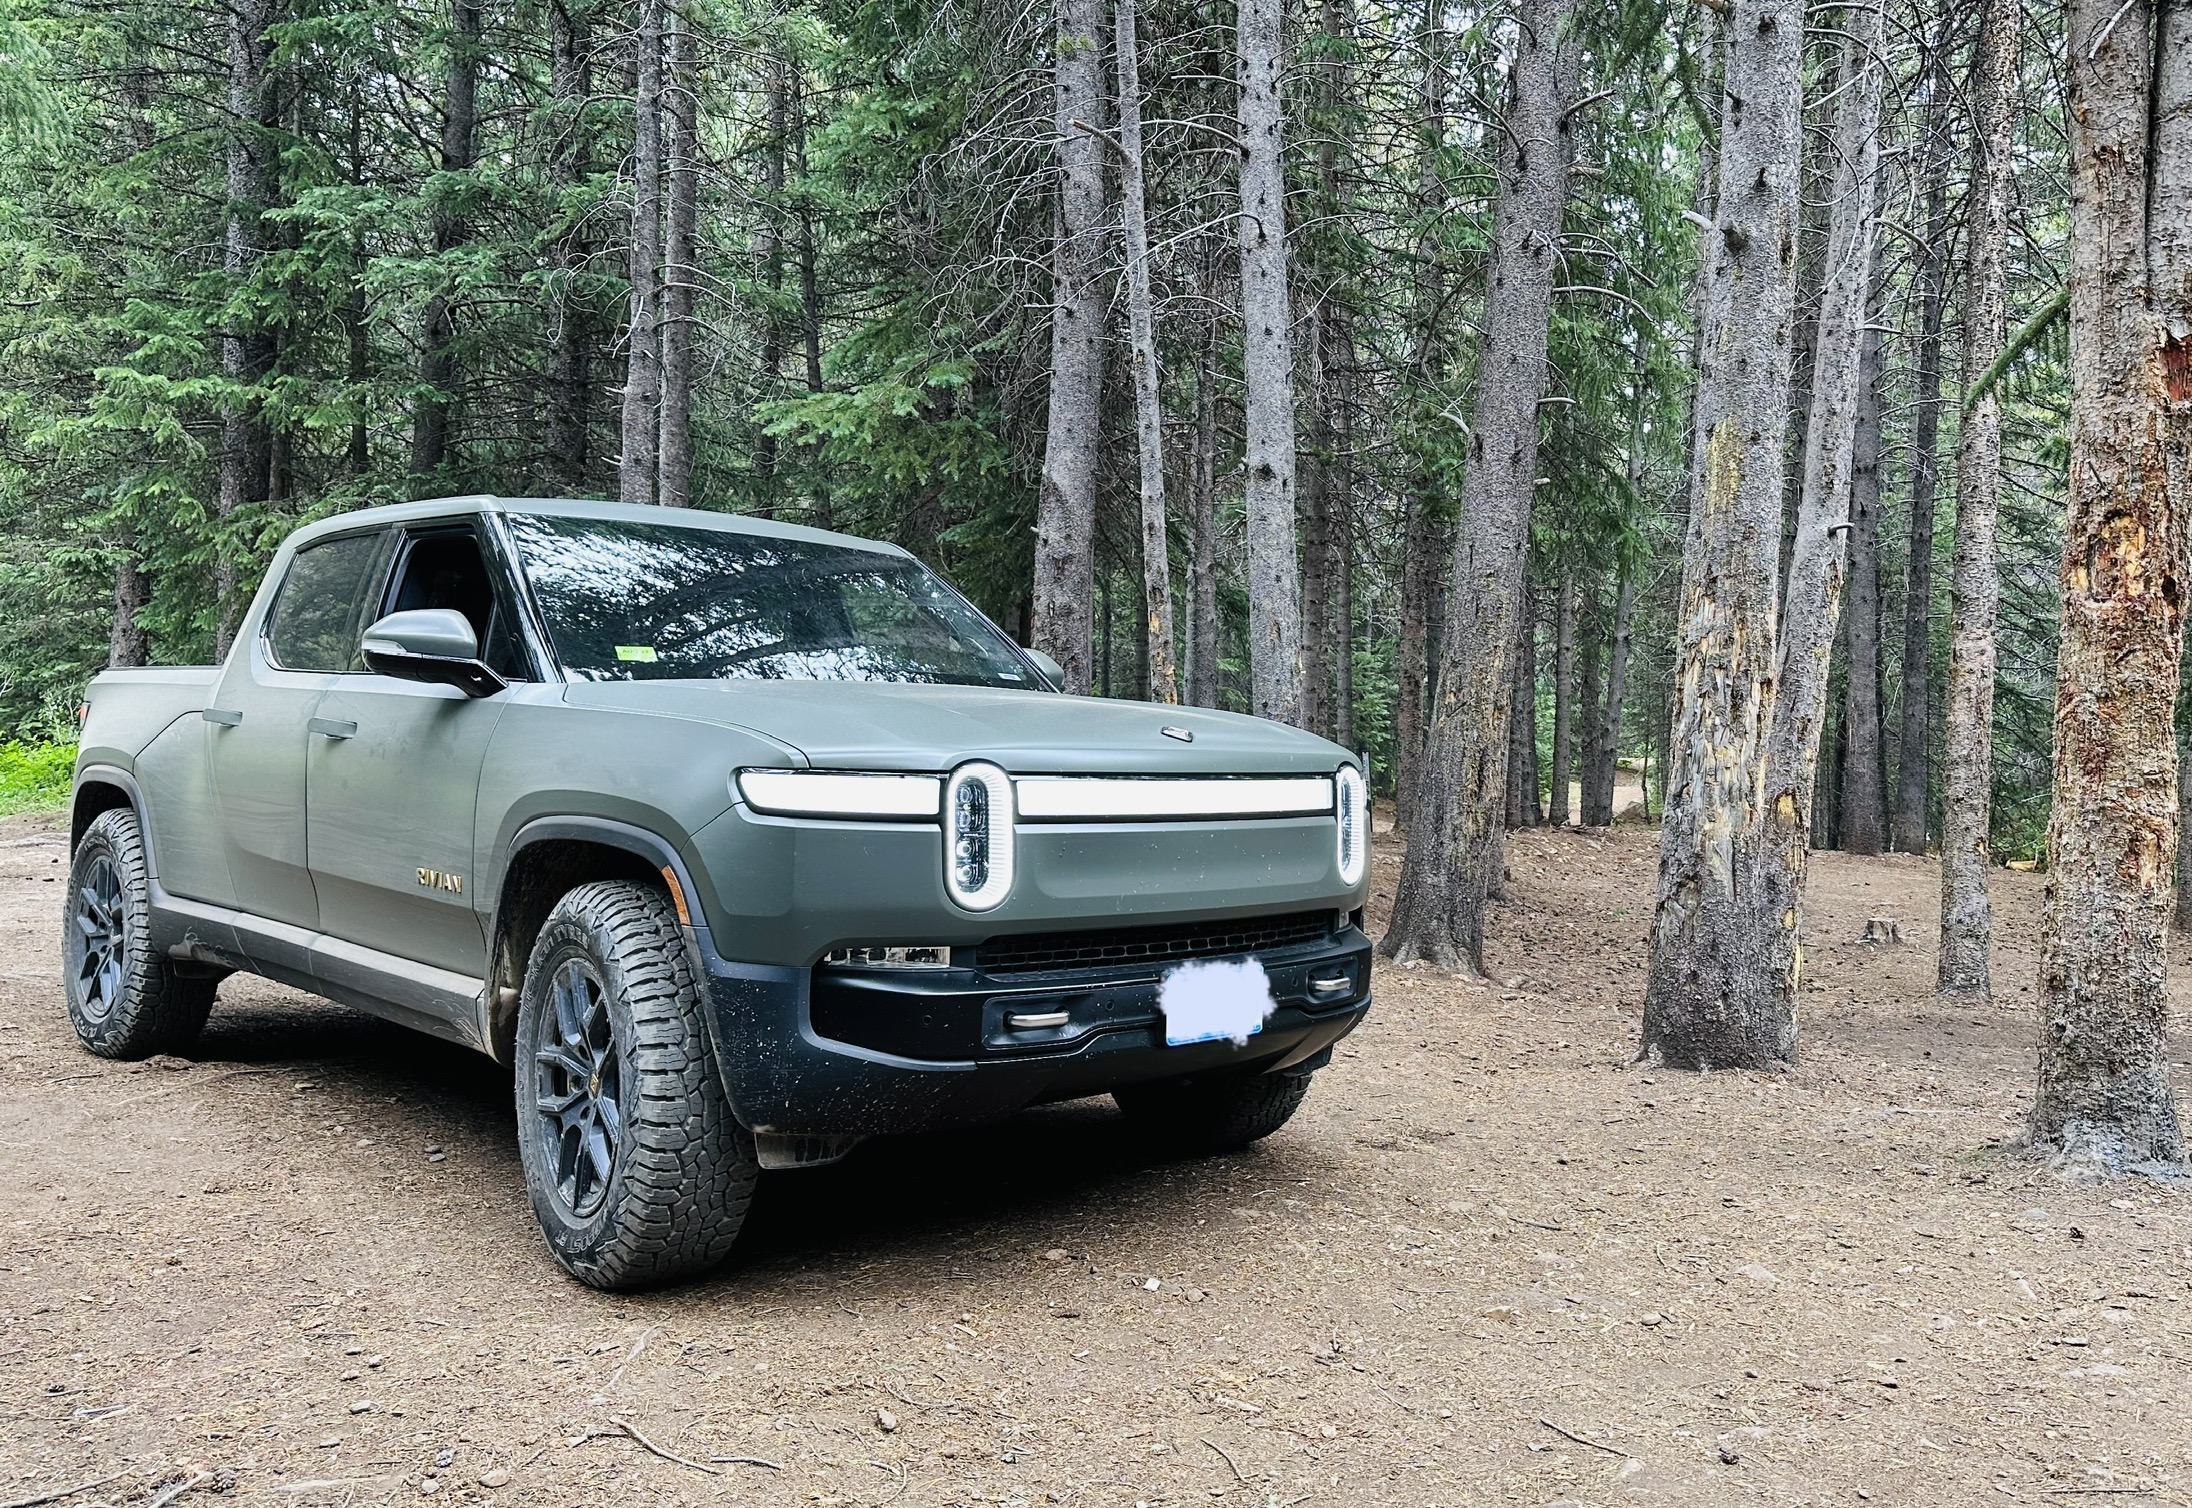 Rivian R1T R1S Tested 35" tires on the R1T - for offroading / overlanding IMG_2146